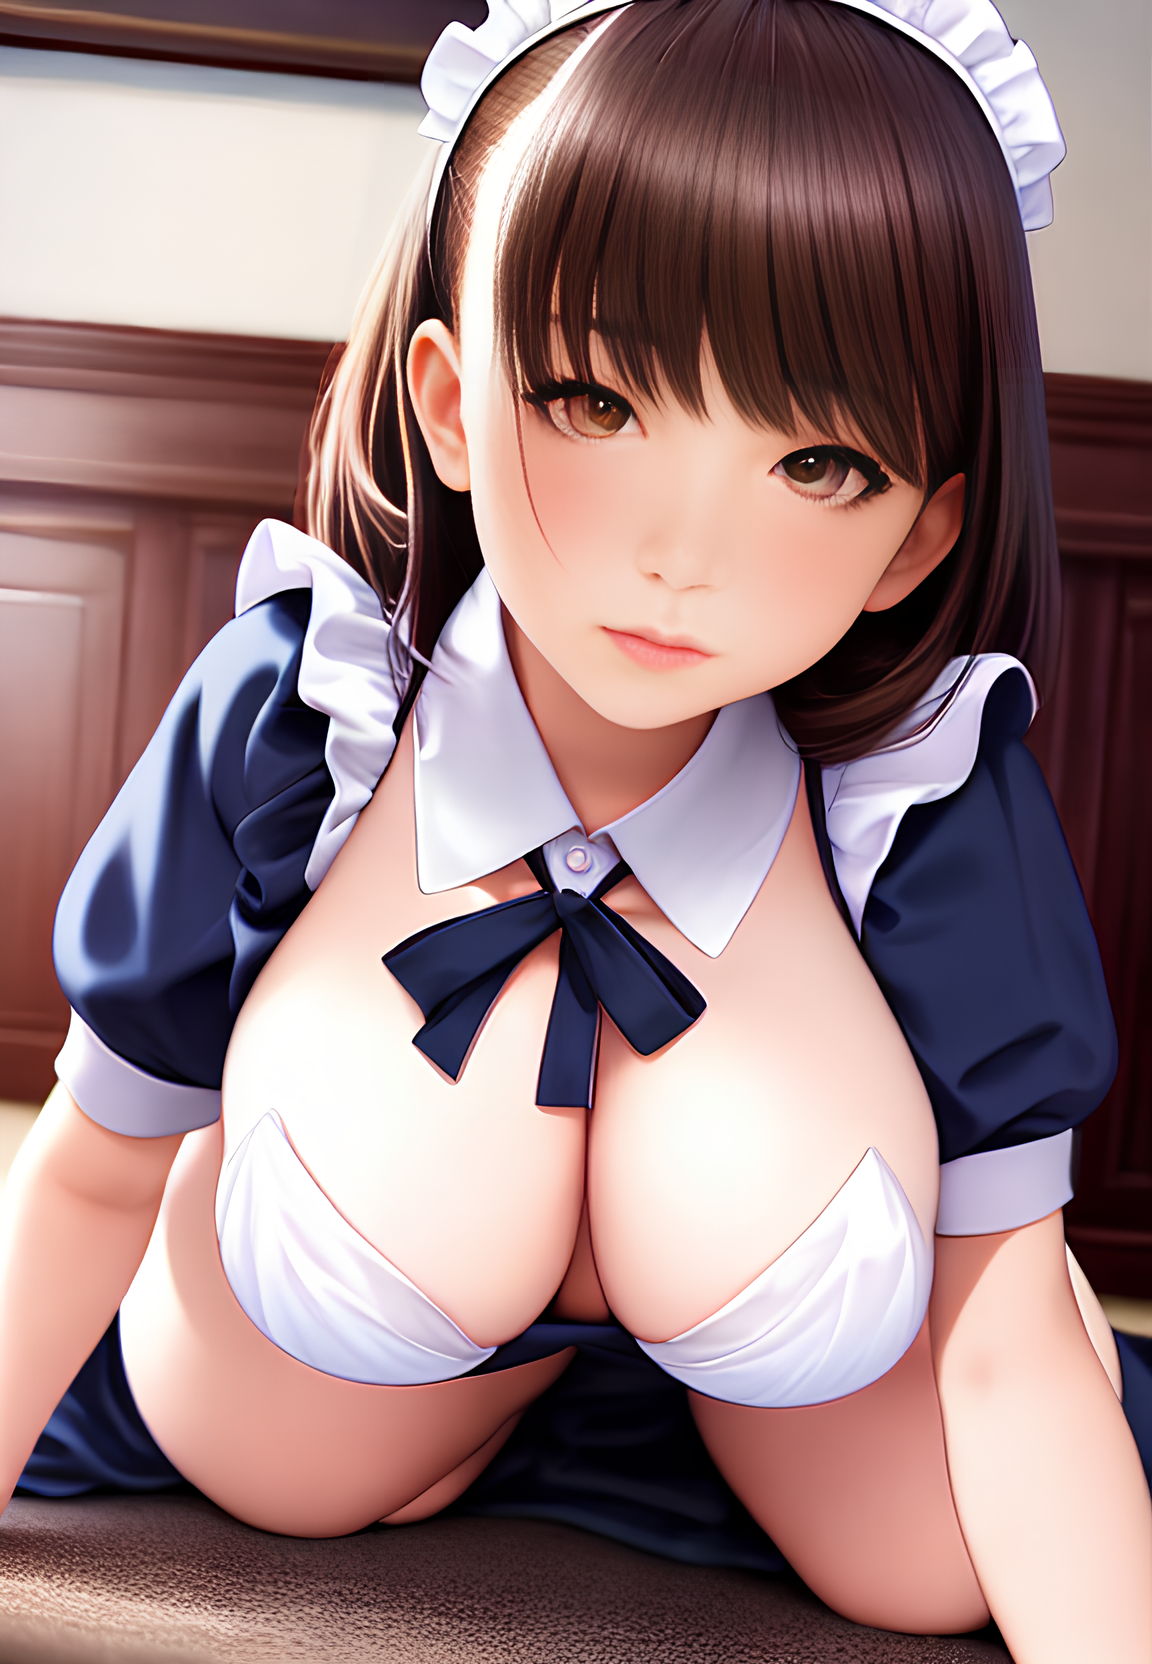 General 1152x1664 panwho AI art maid Asian portrait display digital art women hanging boobs cleavage looking at viewer brunette brown eyes bent over maid outfit